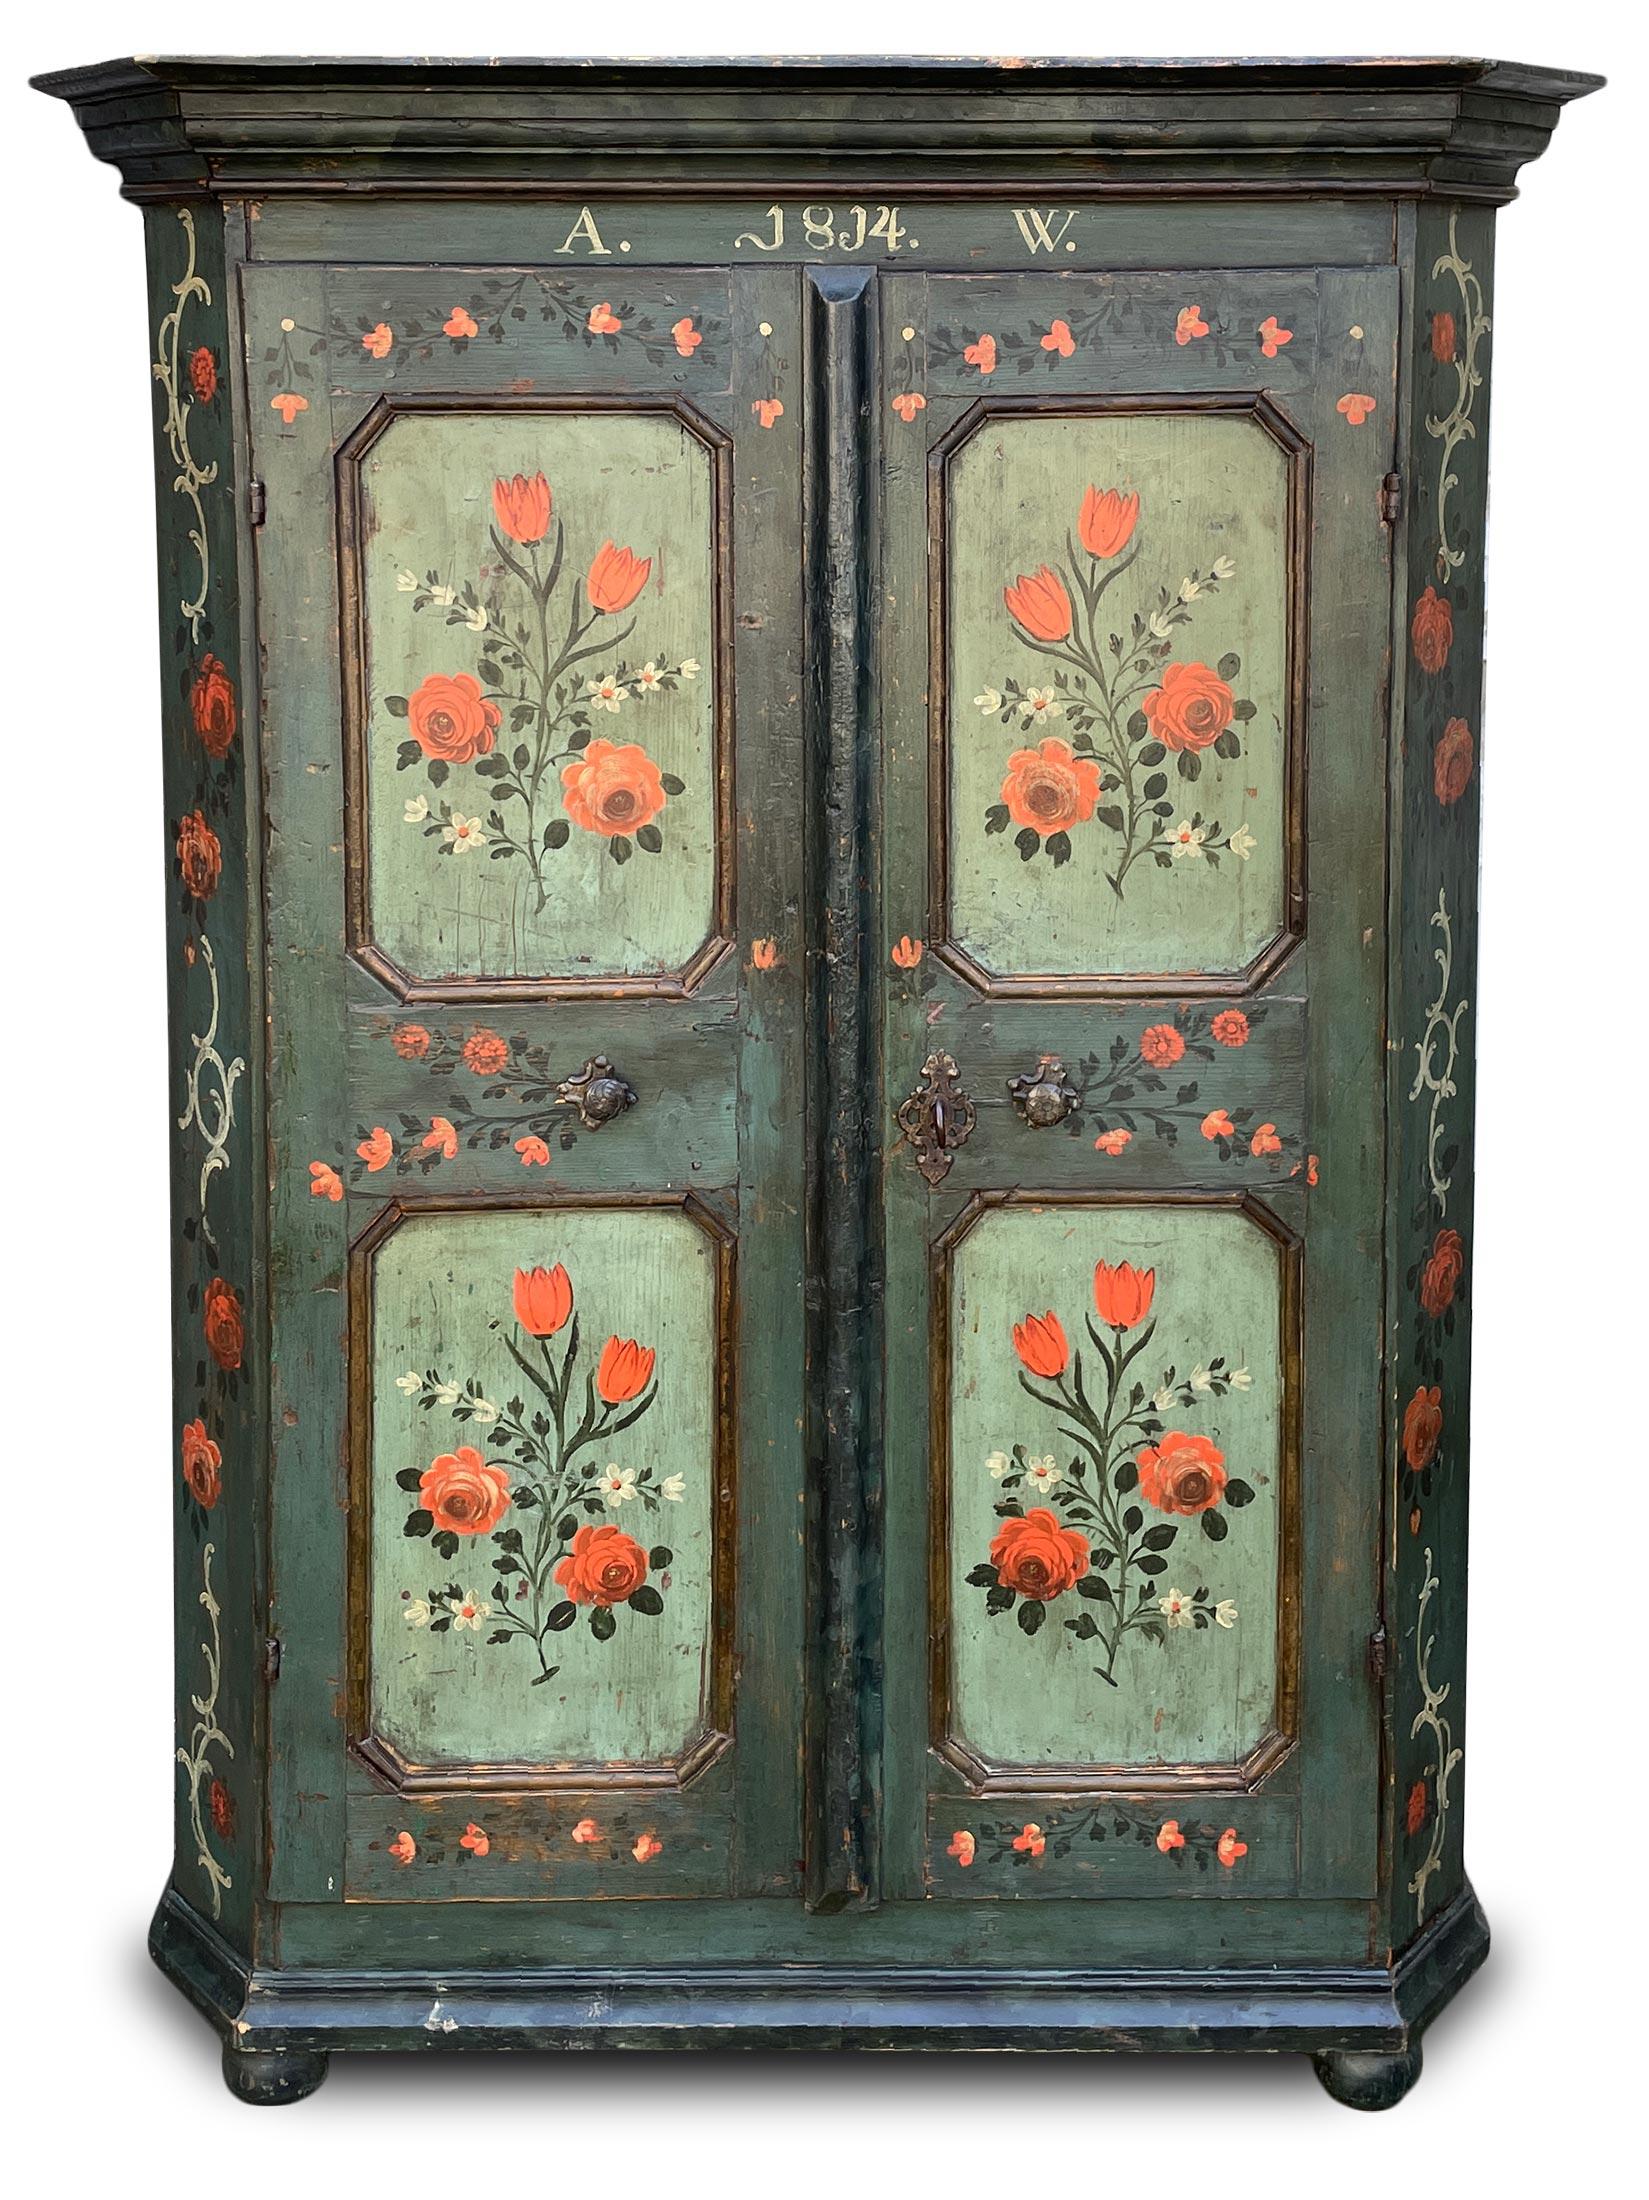 Green Painted Wardrobe dated 1814

Measures: H. 160 – L. 104 (120 on the frames) – P. 40 (48 on the frames)

Tyrolean painted wardrobe with two doors, entirely painted in dark green. On the doors, two large sage-colored panels contain bouquets